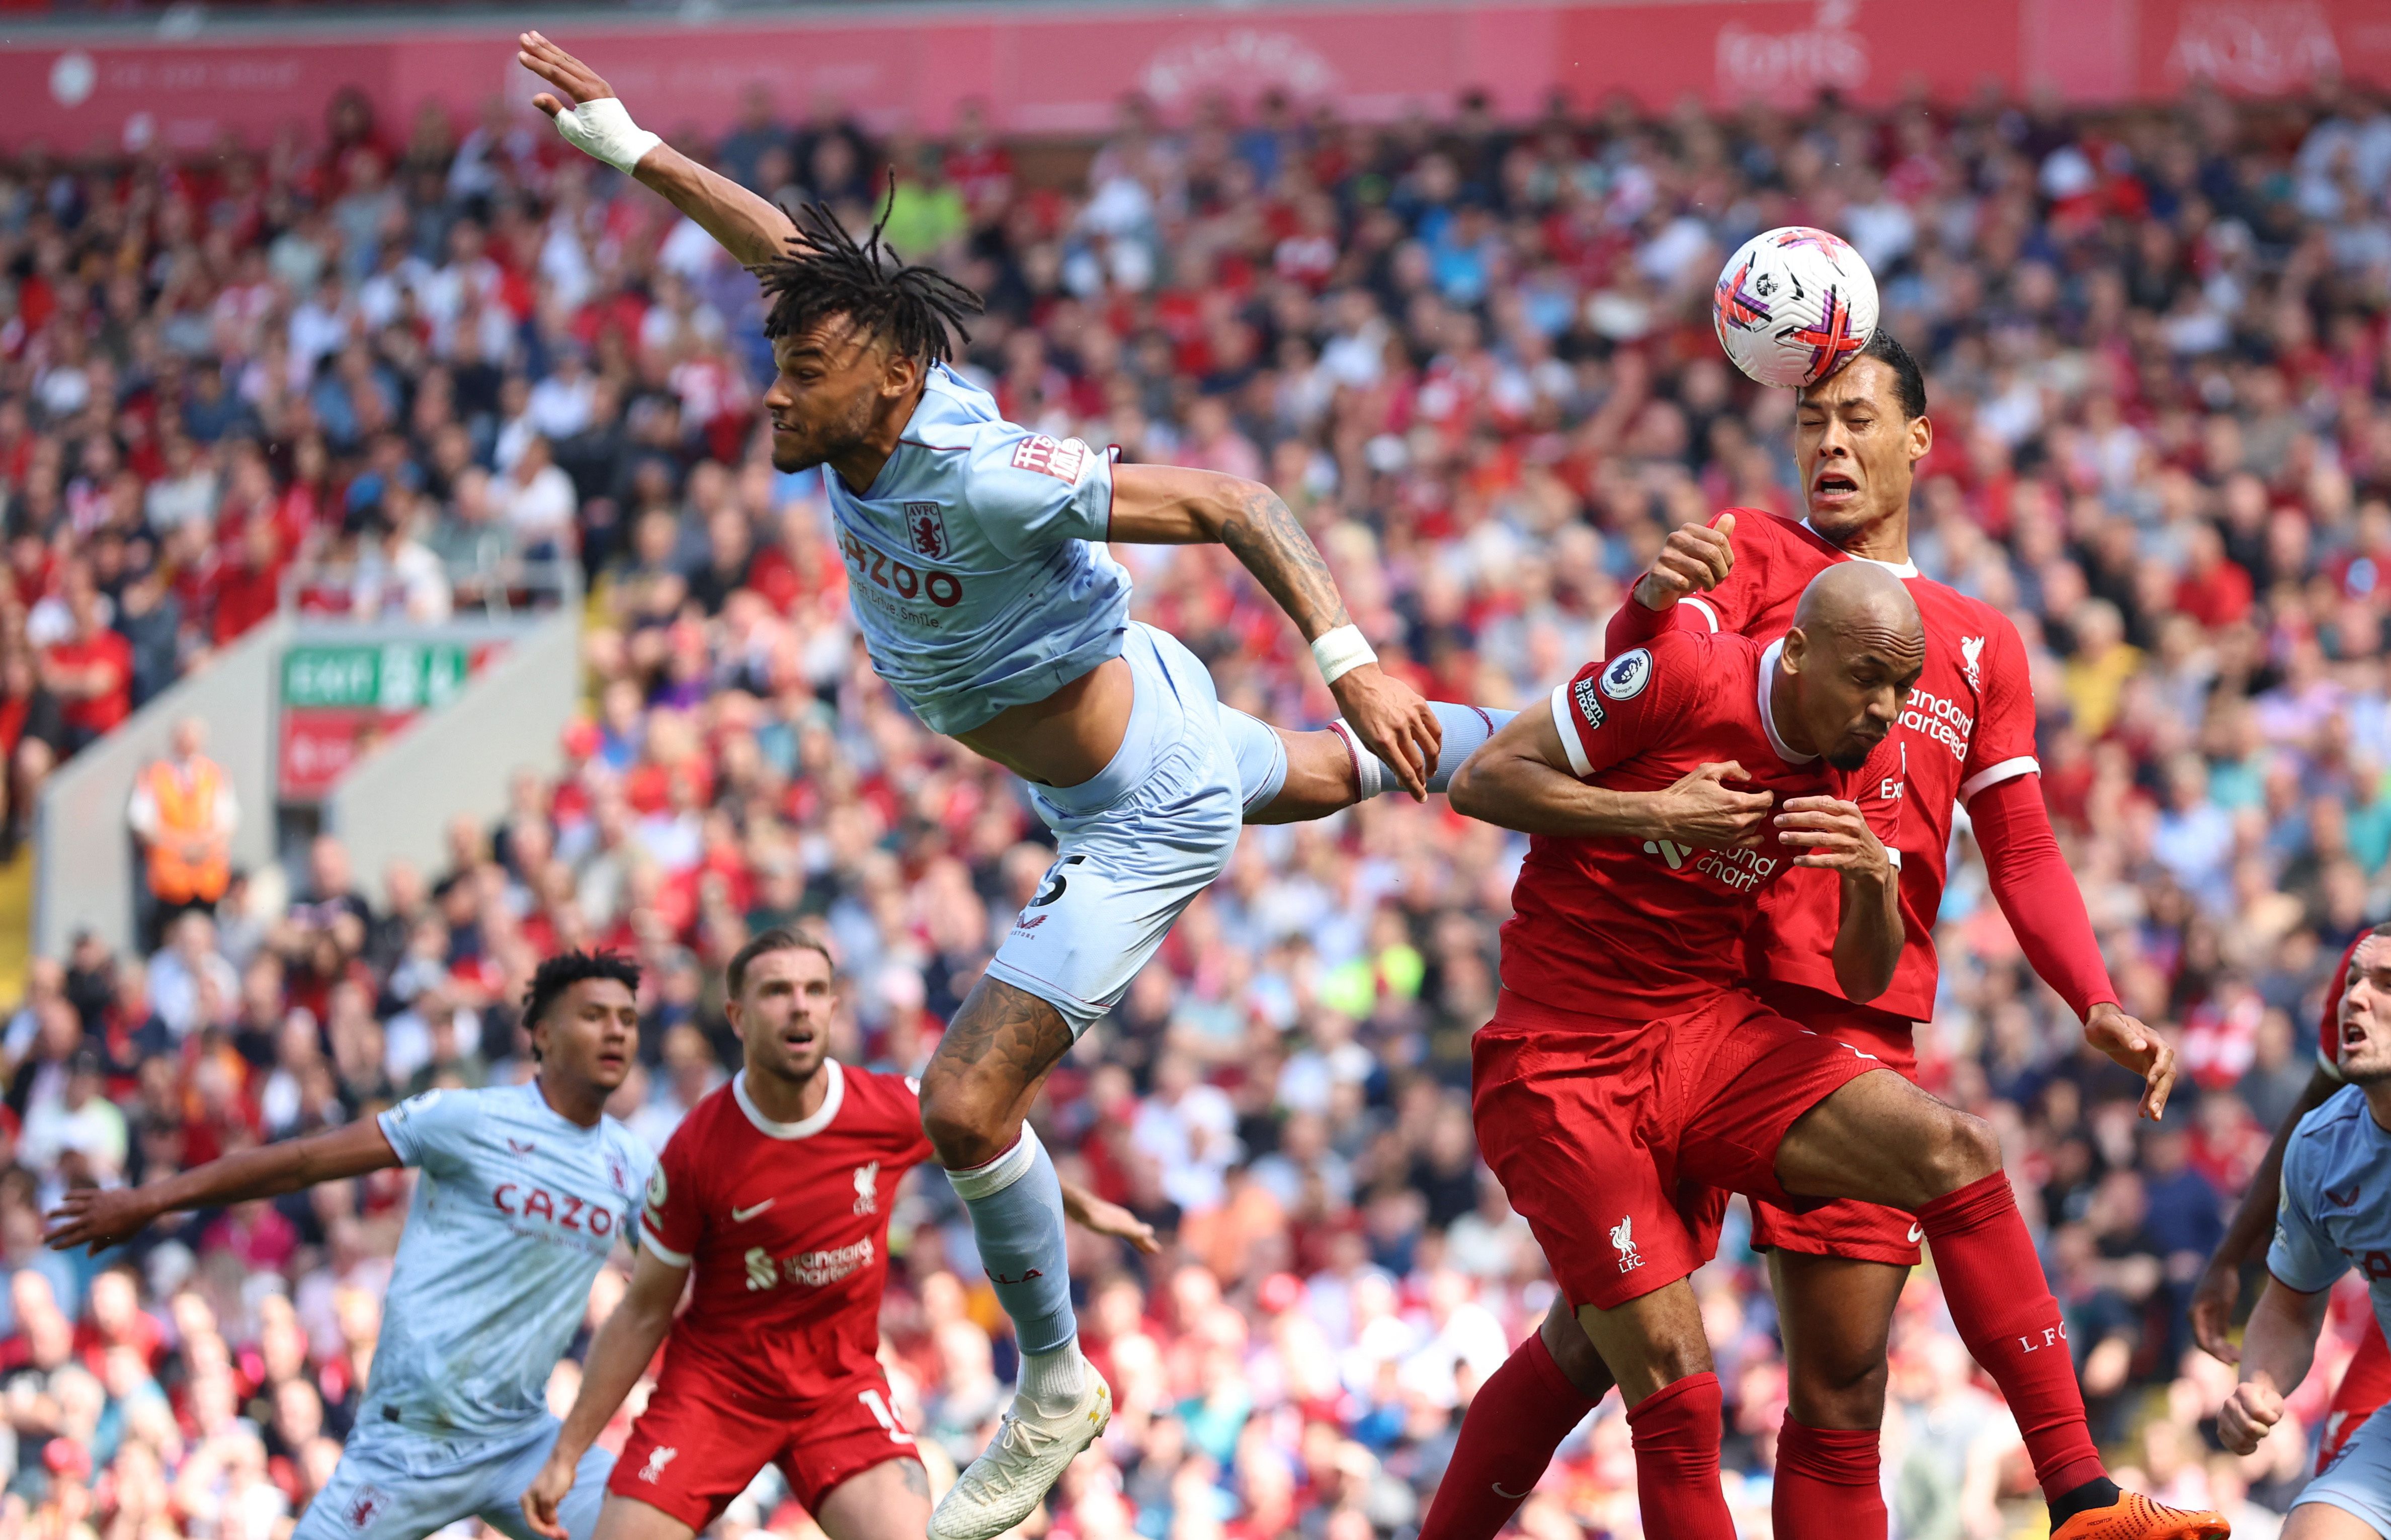 Aston Villa's Tyrone Mings in action v Liverpool